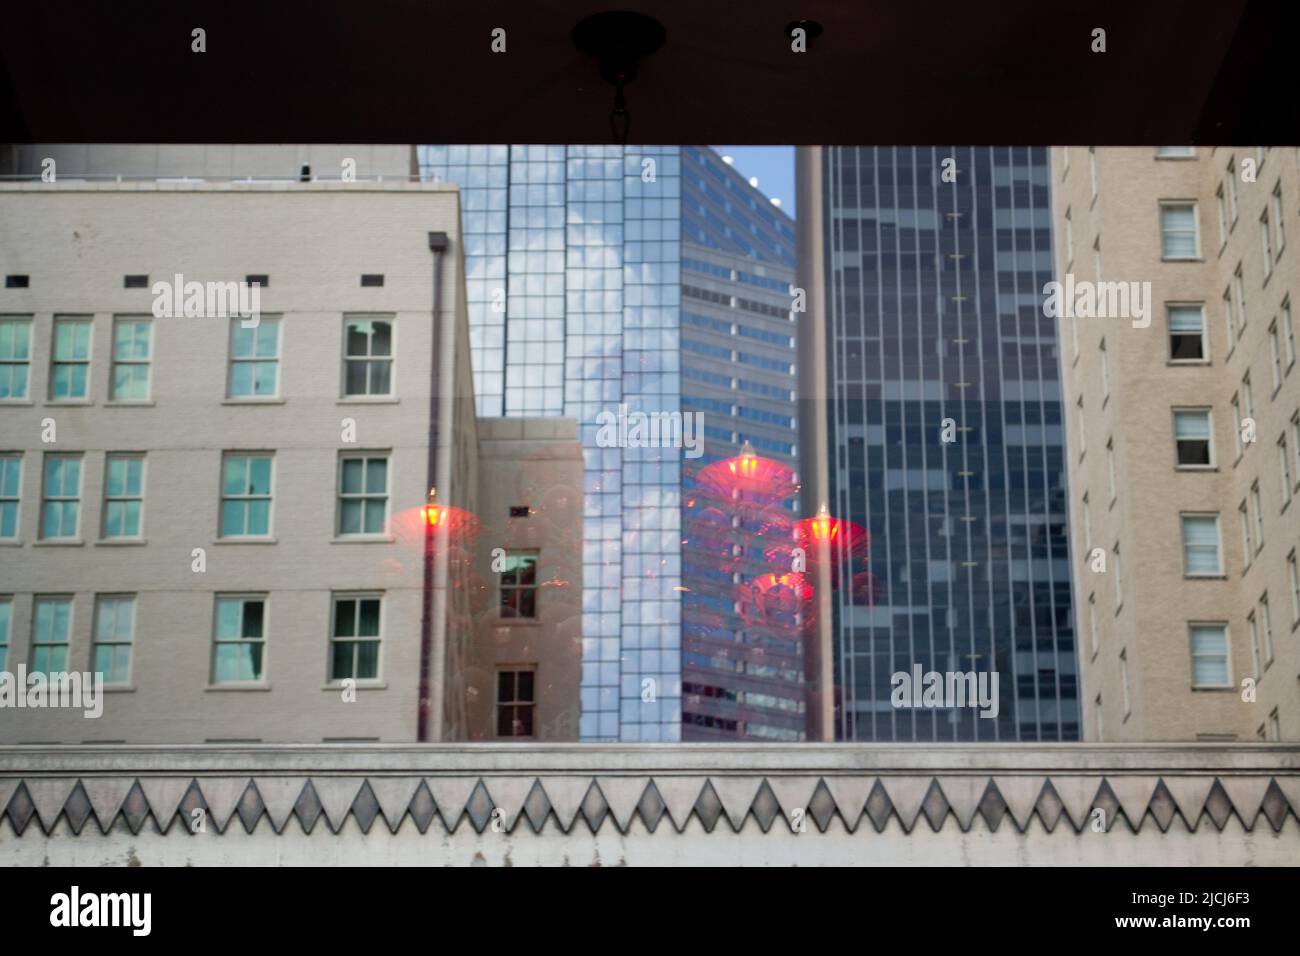 Abstract and artistic cityscape photography of various buildings in downtown Dallas and Fort Worth, Texas. Stock Photo